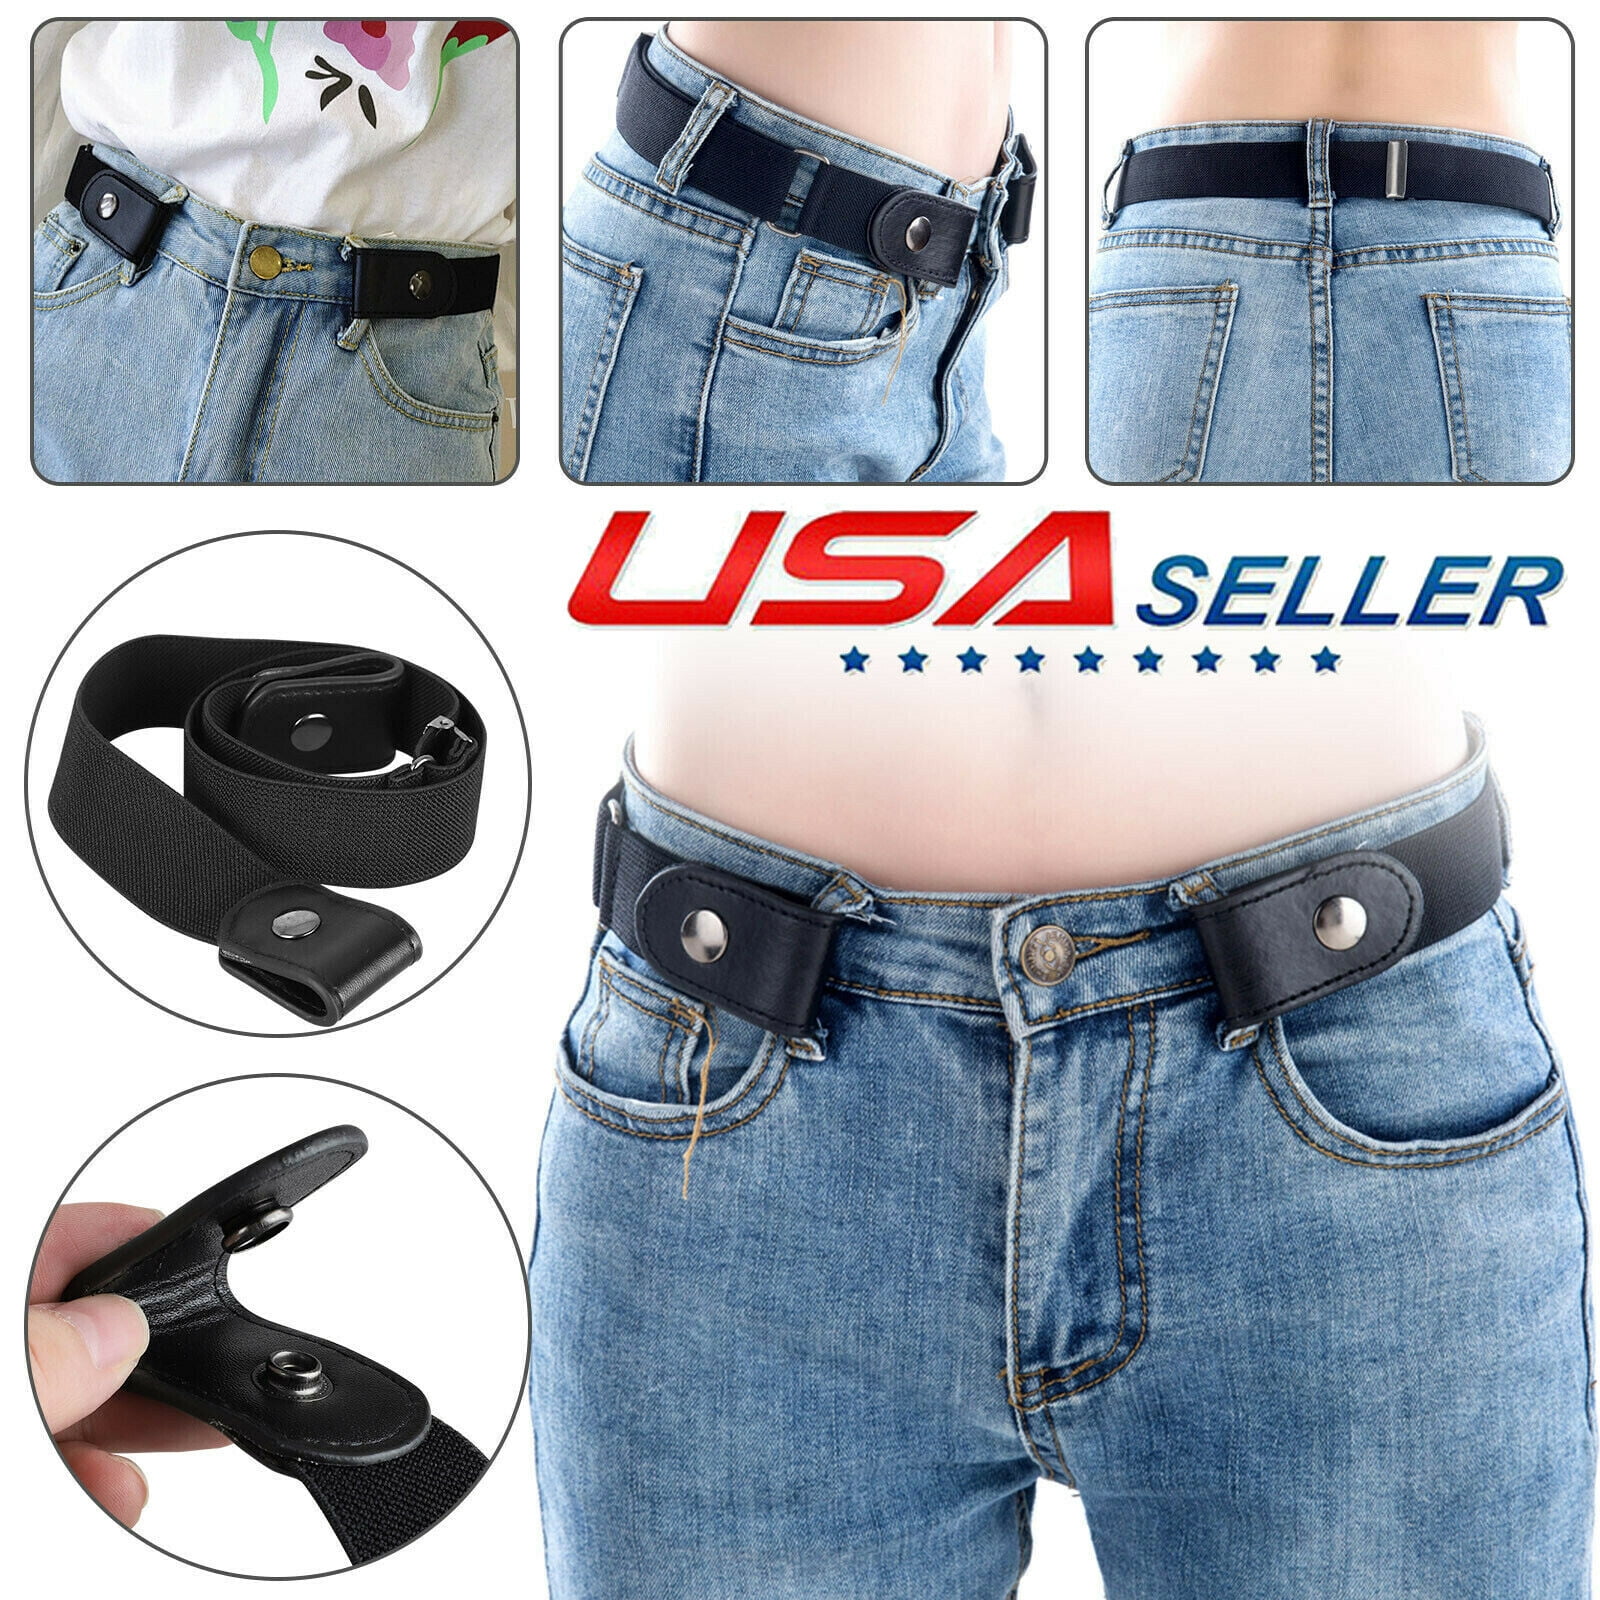 No Buckle Invisible Stretch Belt Buckle-Free Elastic Belt for Women and Men  